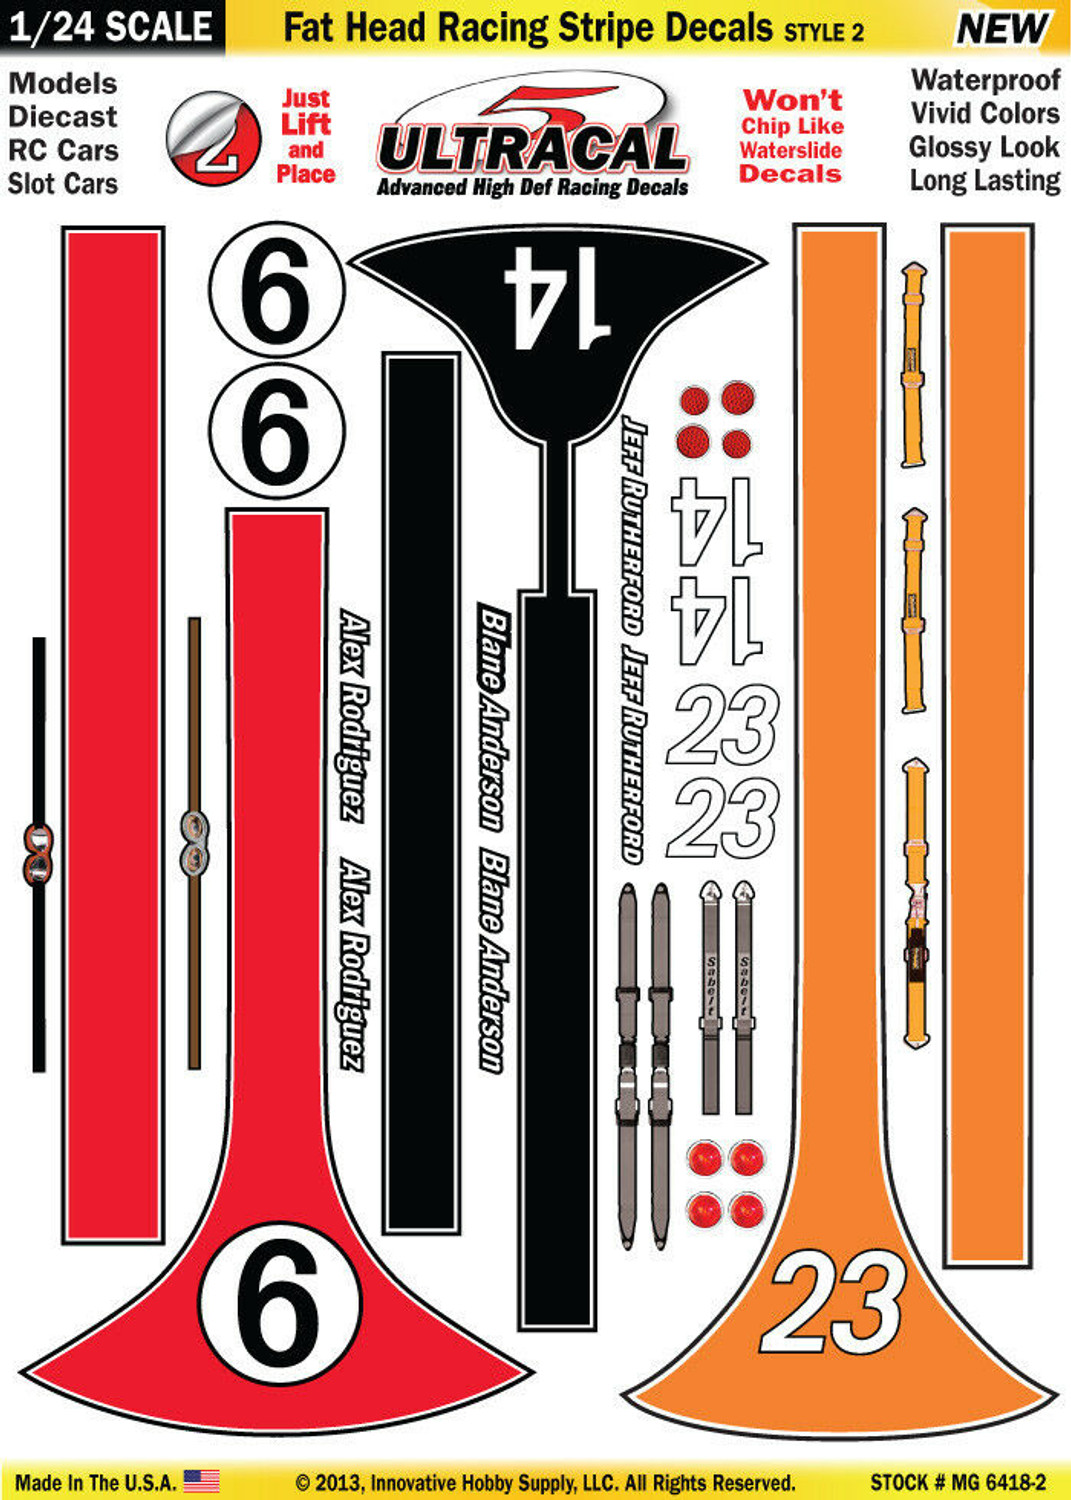 MG 6418-2 Ultracal Fat Head Racing Stripe Style 2 Decals 1:24 Scale